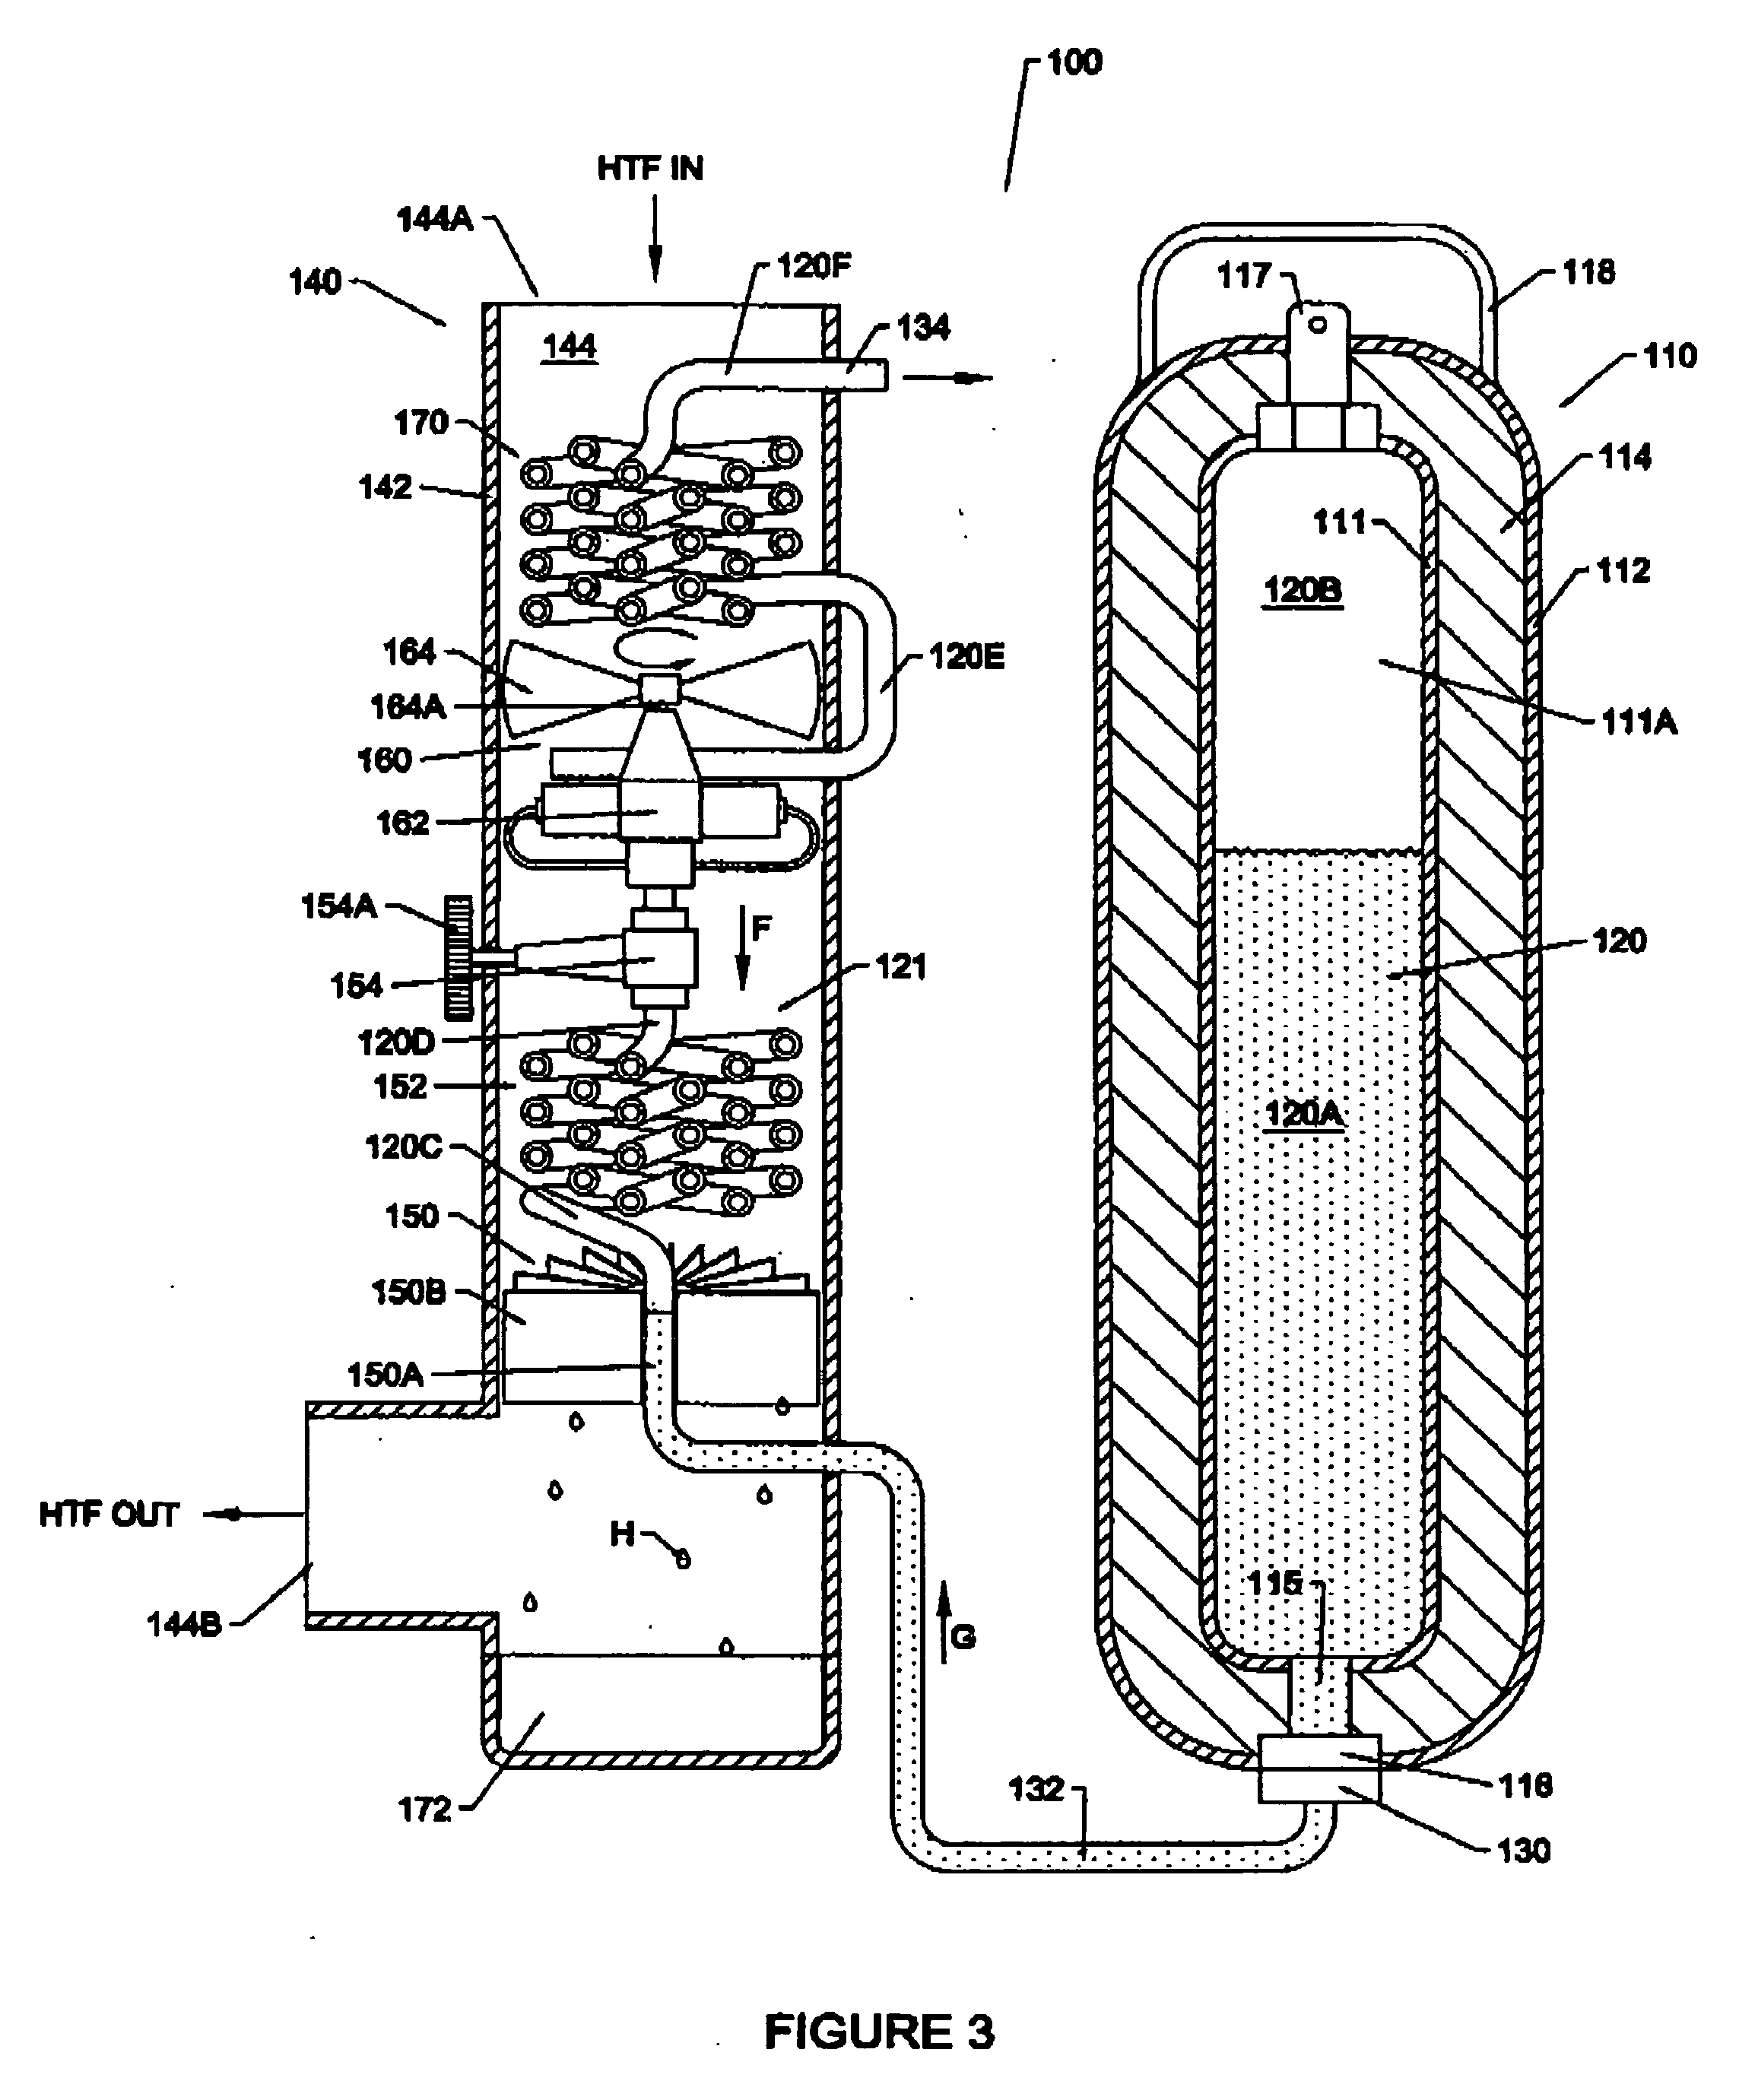 Apparatus and methods for providing a flow of a heat transfer fluid in a microenvironment